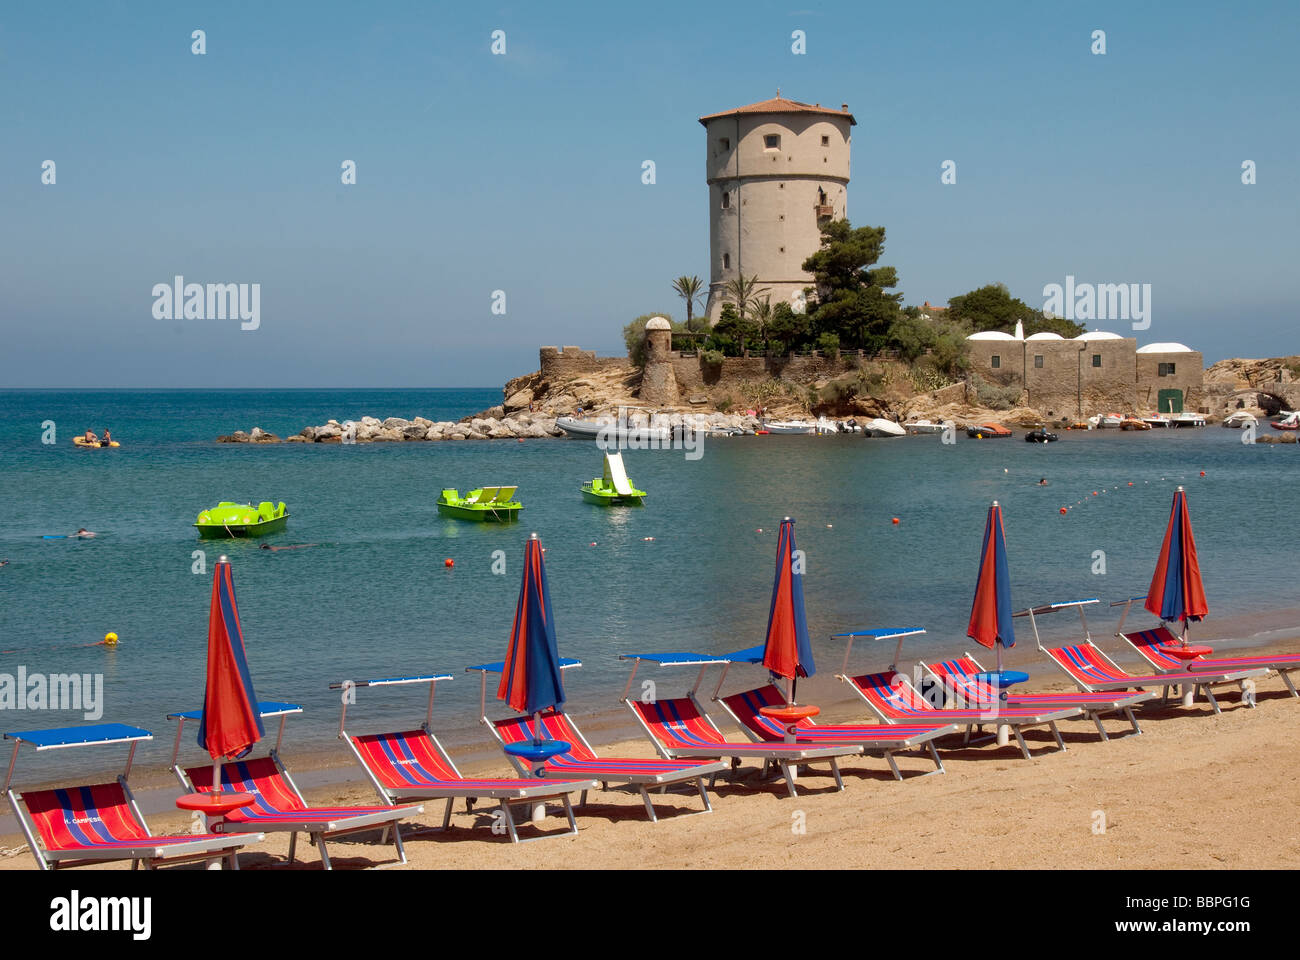 Umbrellas and sunbeds at Giglio Campese the main beach on the Island of Giglio or Isola del Giglio off the Tuscan coast Stock Photo